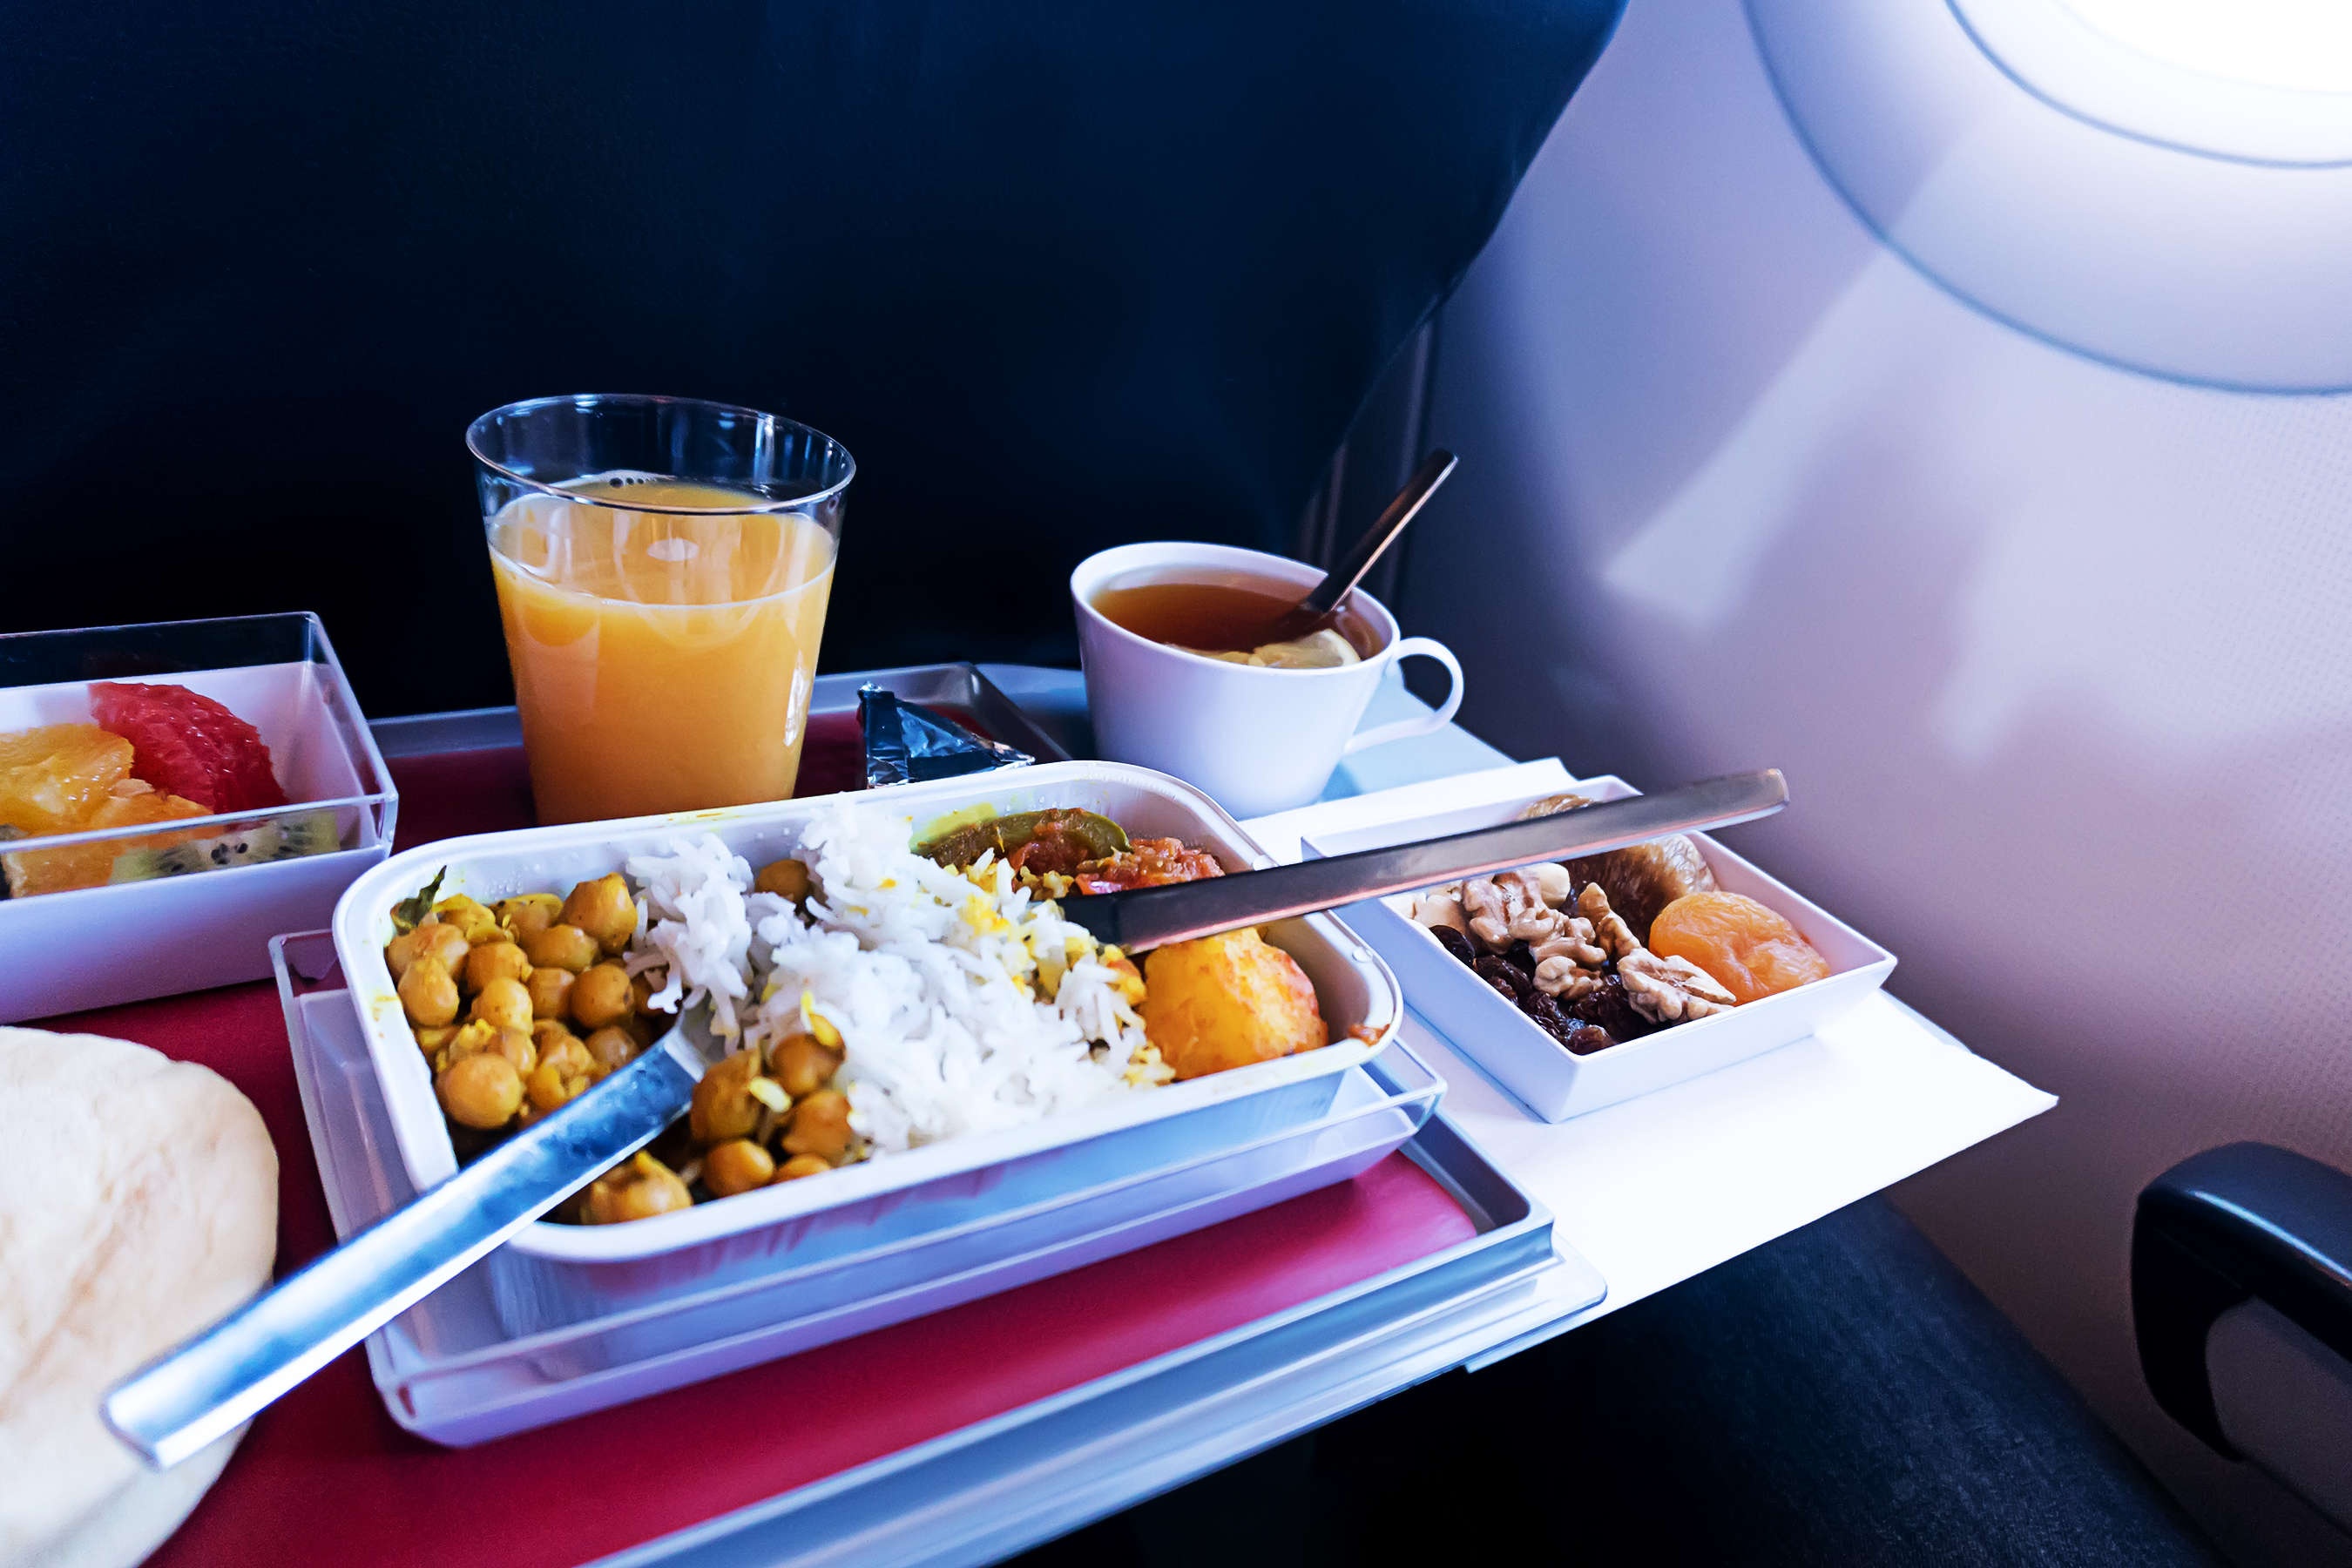 COVID-19 effects: This airline in India will discontinue its on-board meal service